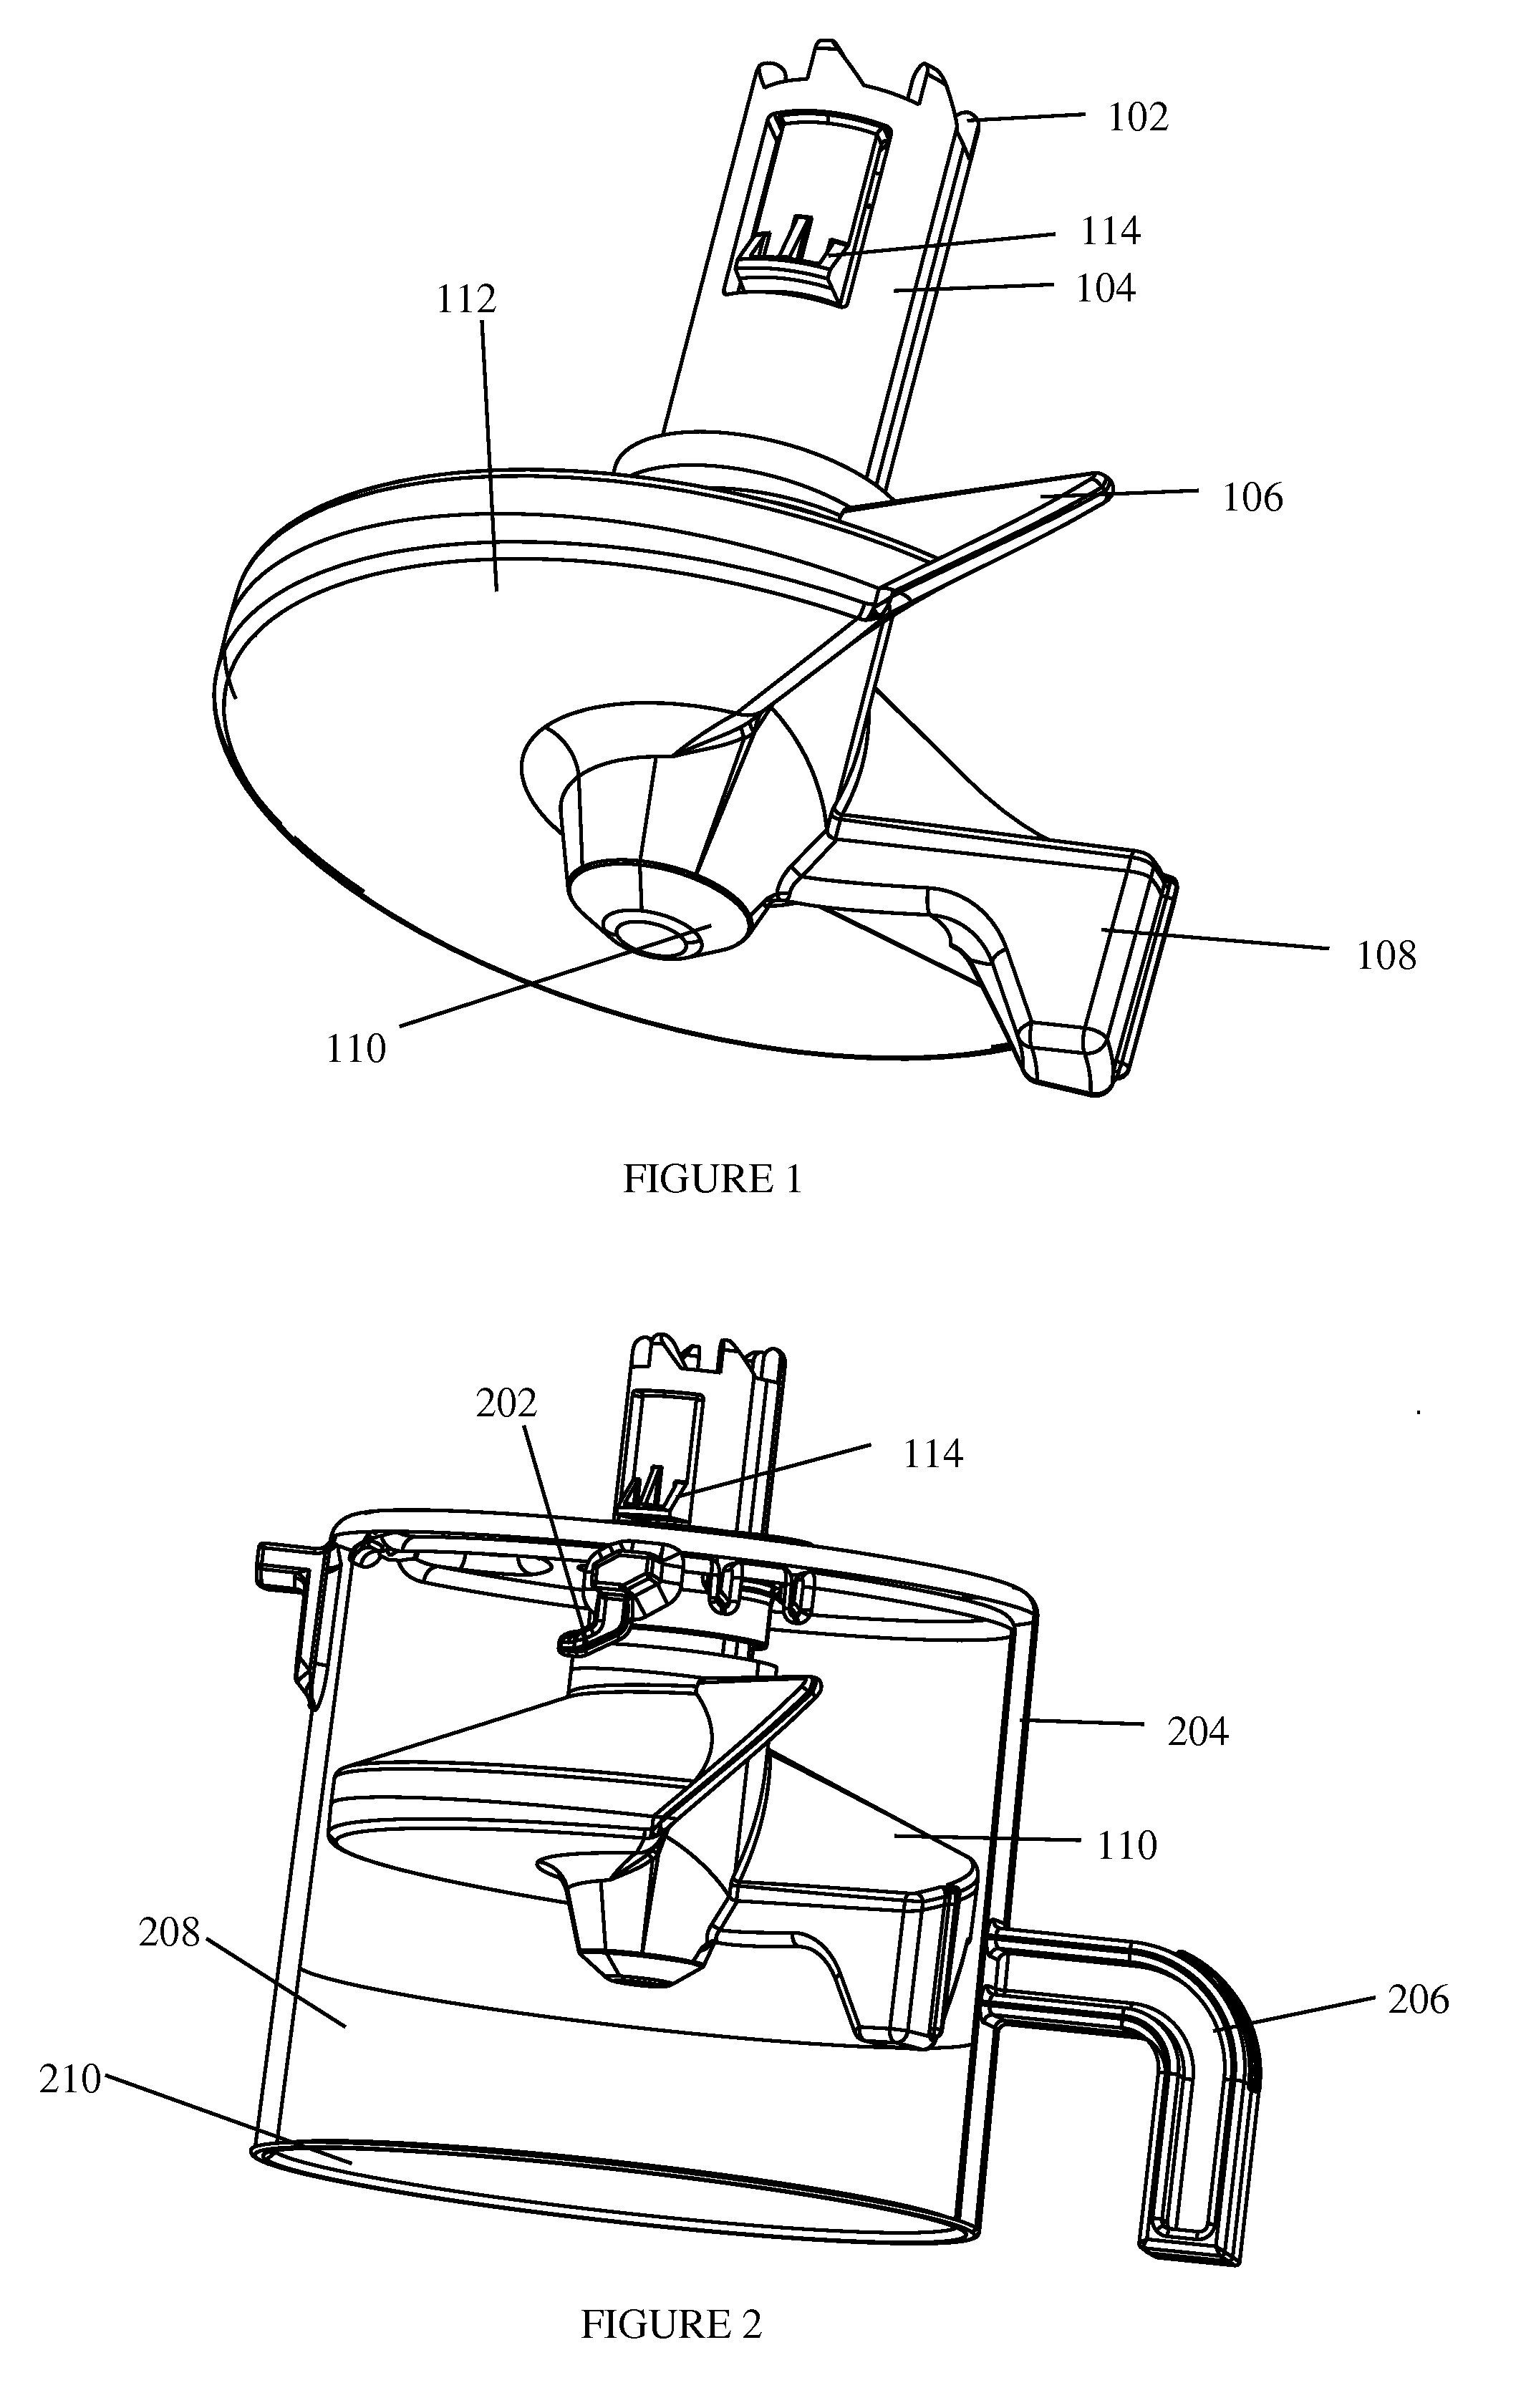 Apparatus, system and method for an adaptive kneading technology for a food preparation appliance